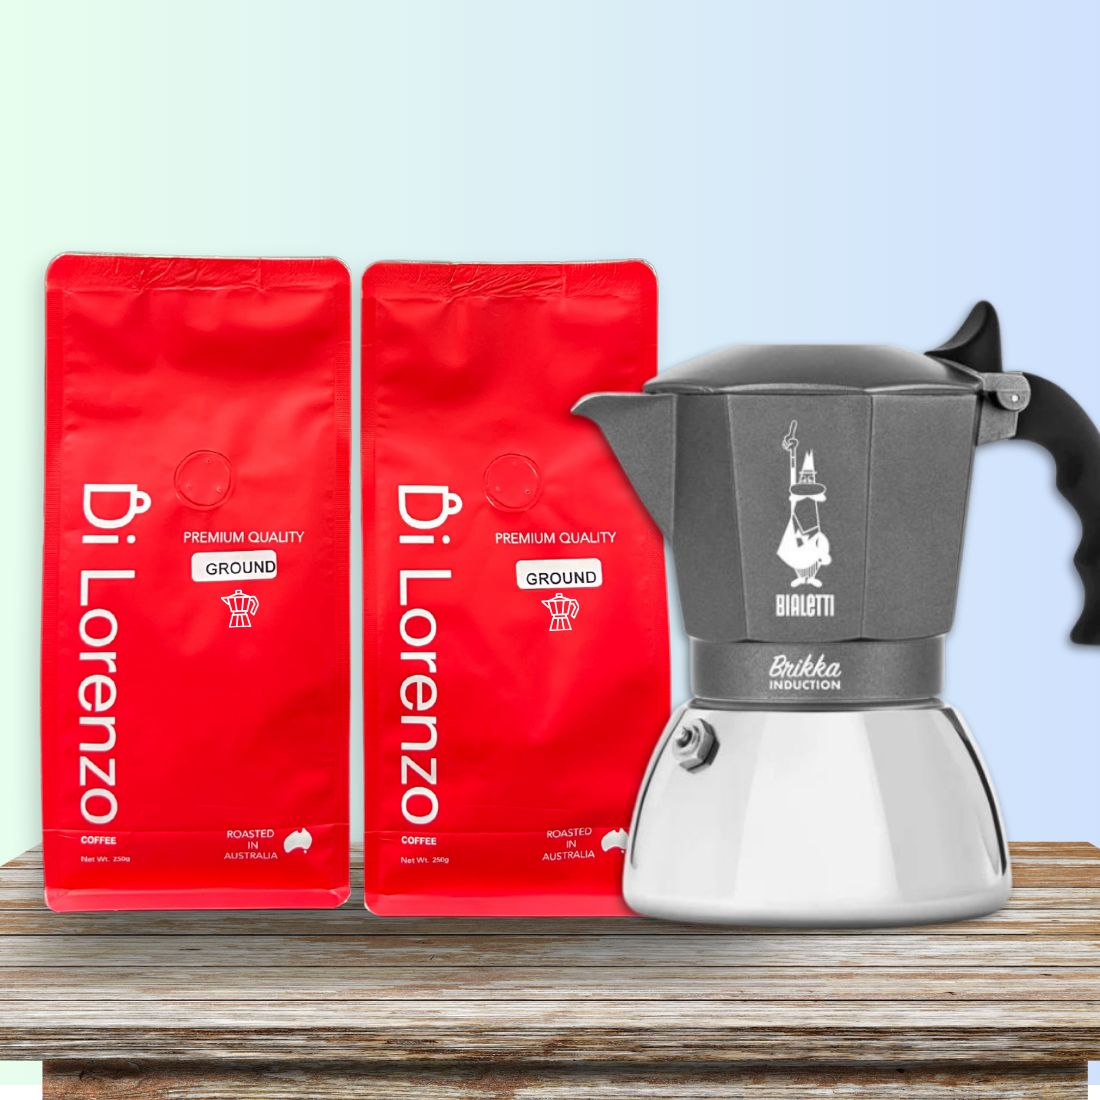 Twin red bags of Di Lorenzo premium quality ground coffee specific for Moka stovetop,  flank a classic grey Bialetti Brikka induction stovetop espresso maker, all presented on a textured wooden surface with a gradient blue sky background.